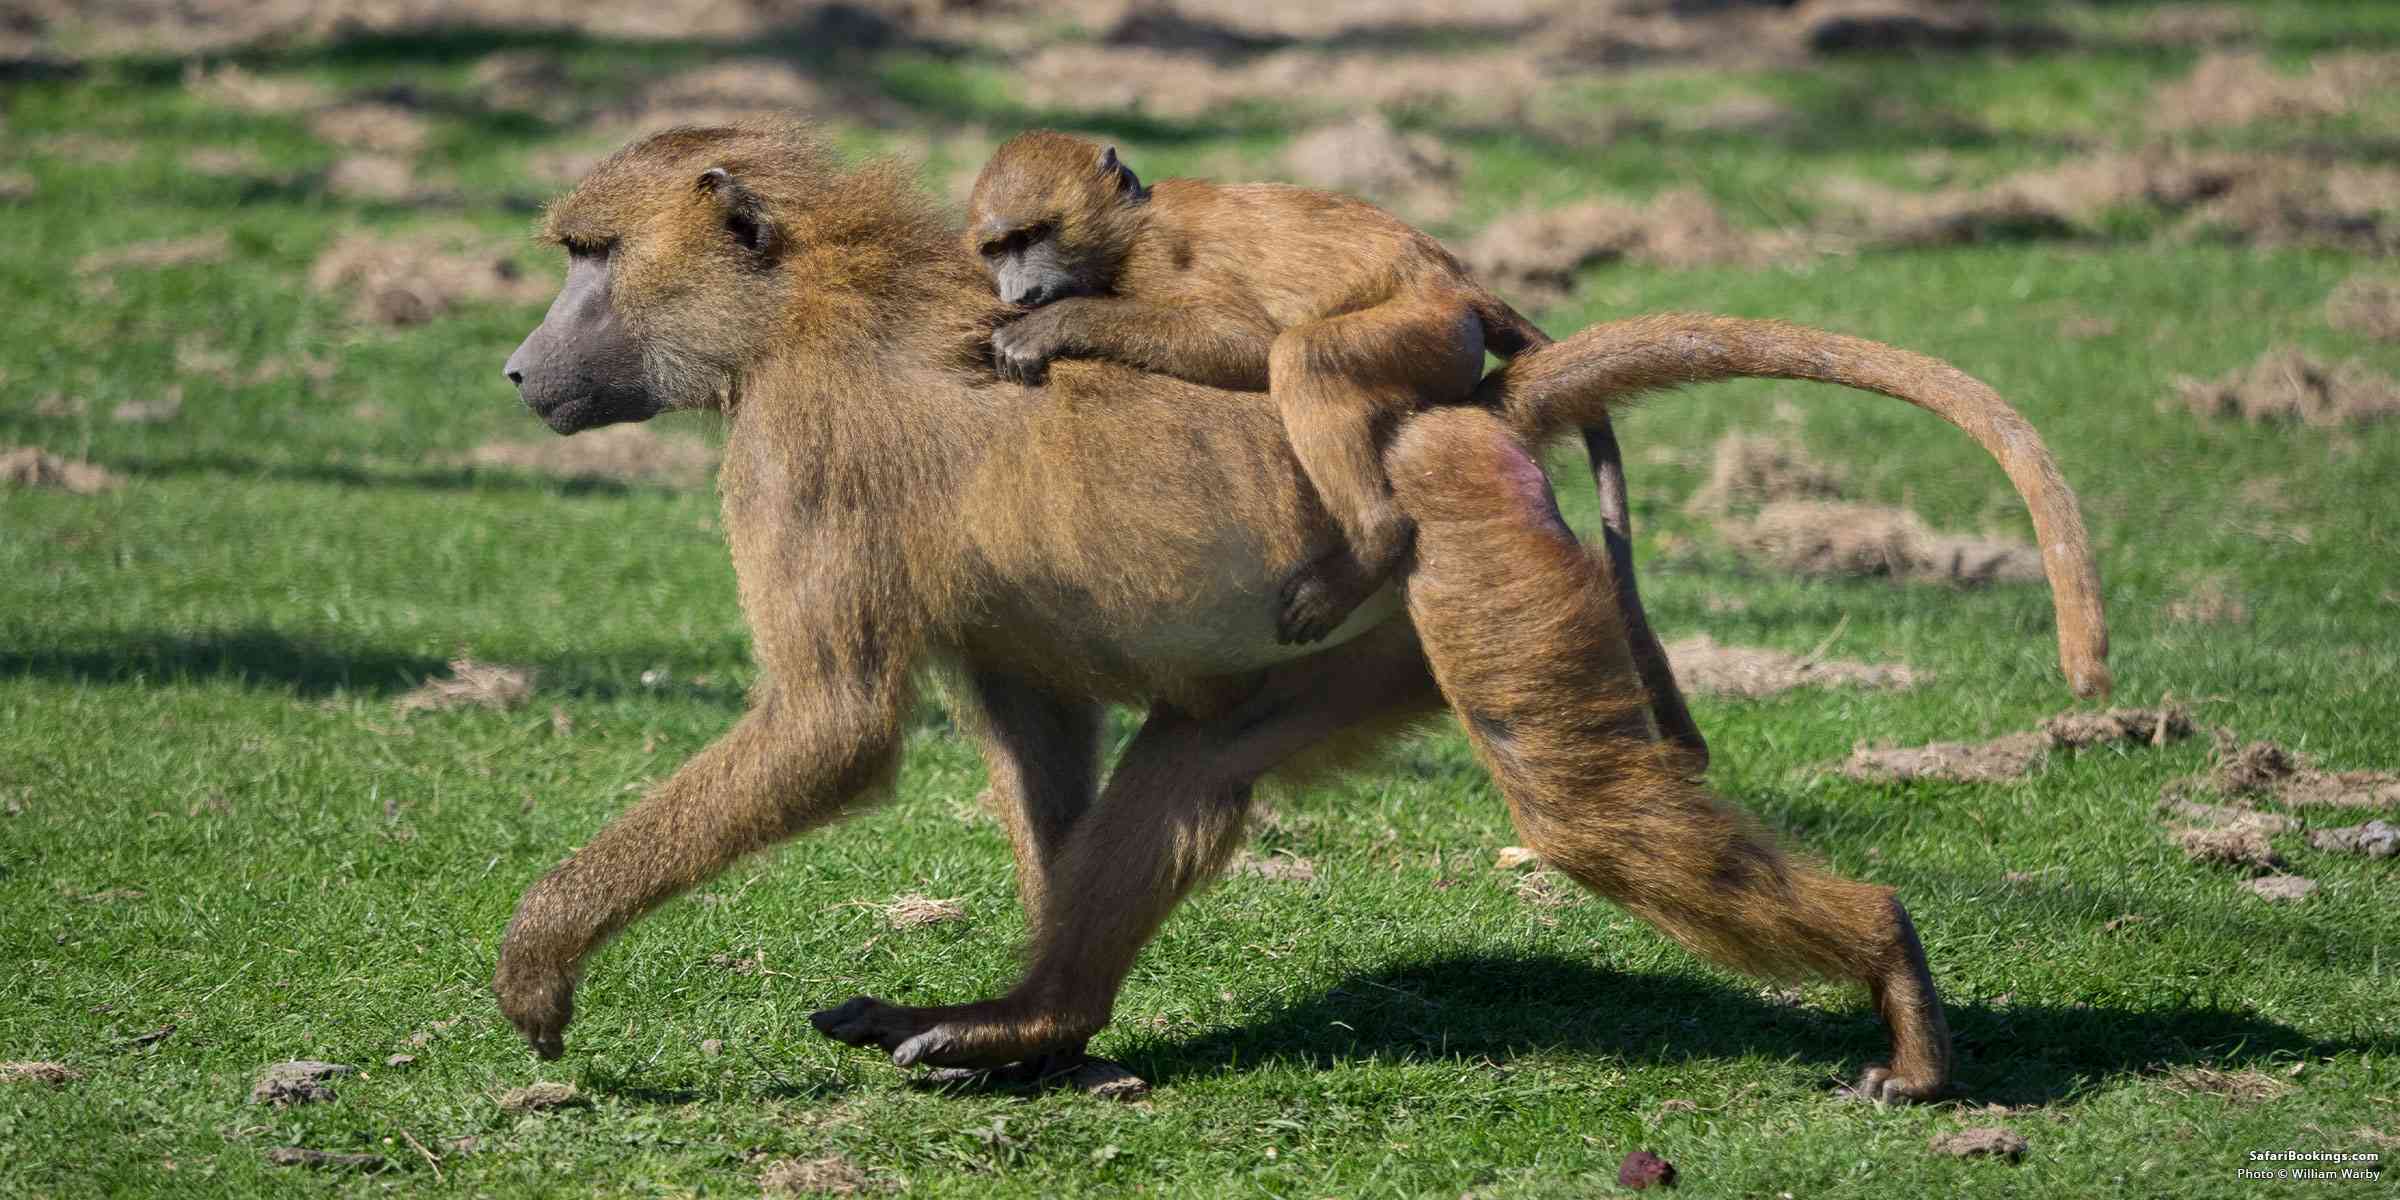 5 Interesting Facts About the Baboon (Papio Papio)